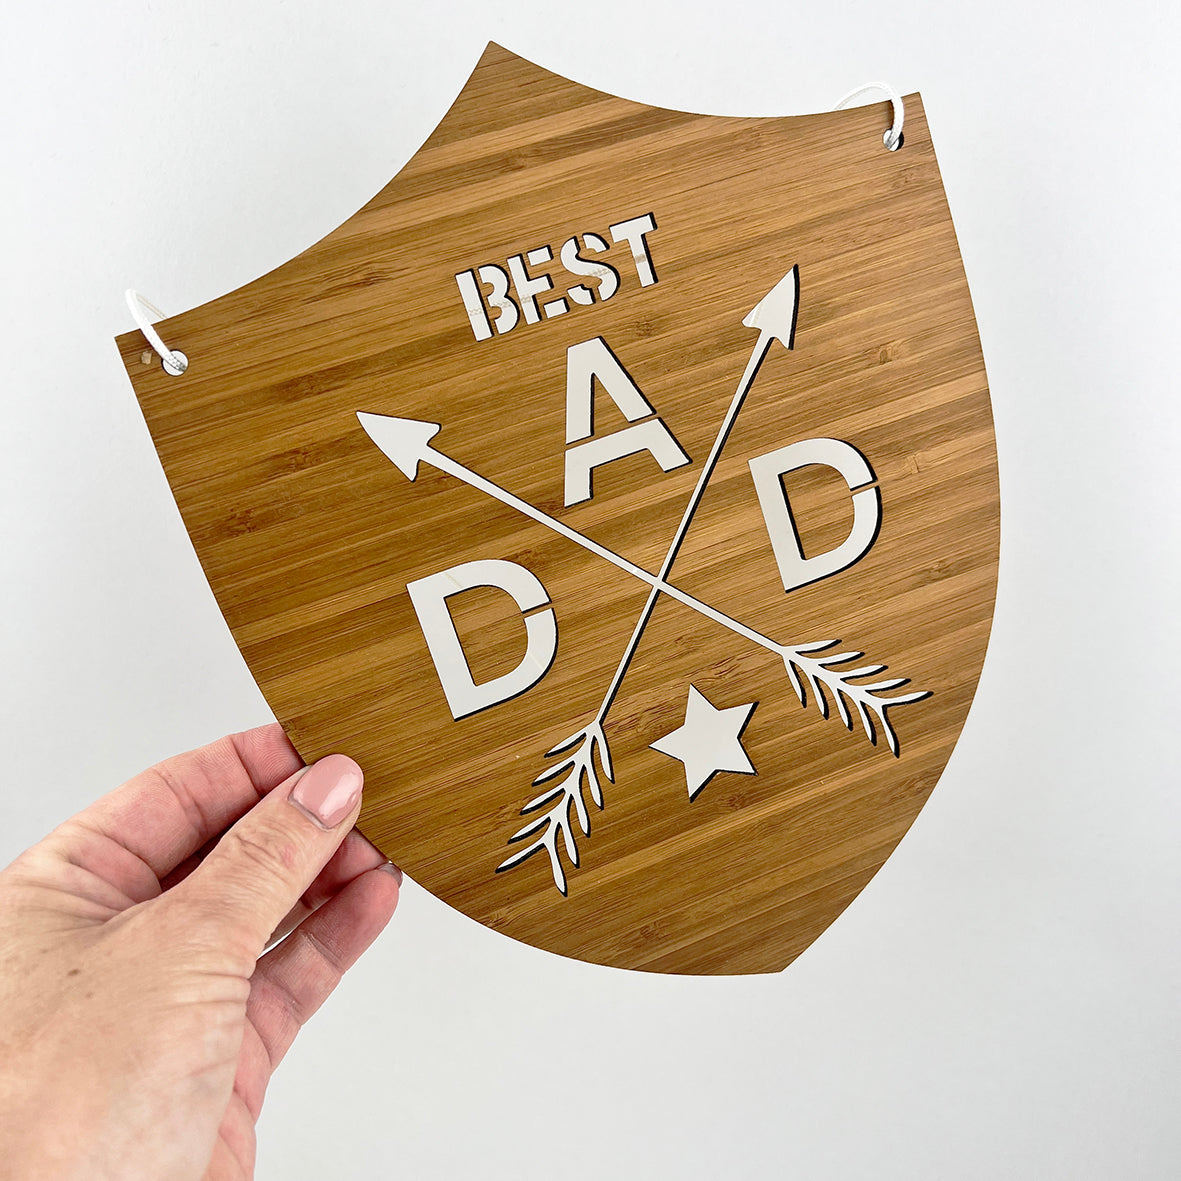 SALE! Best Dad Bamboo Wall Plaque